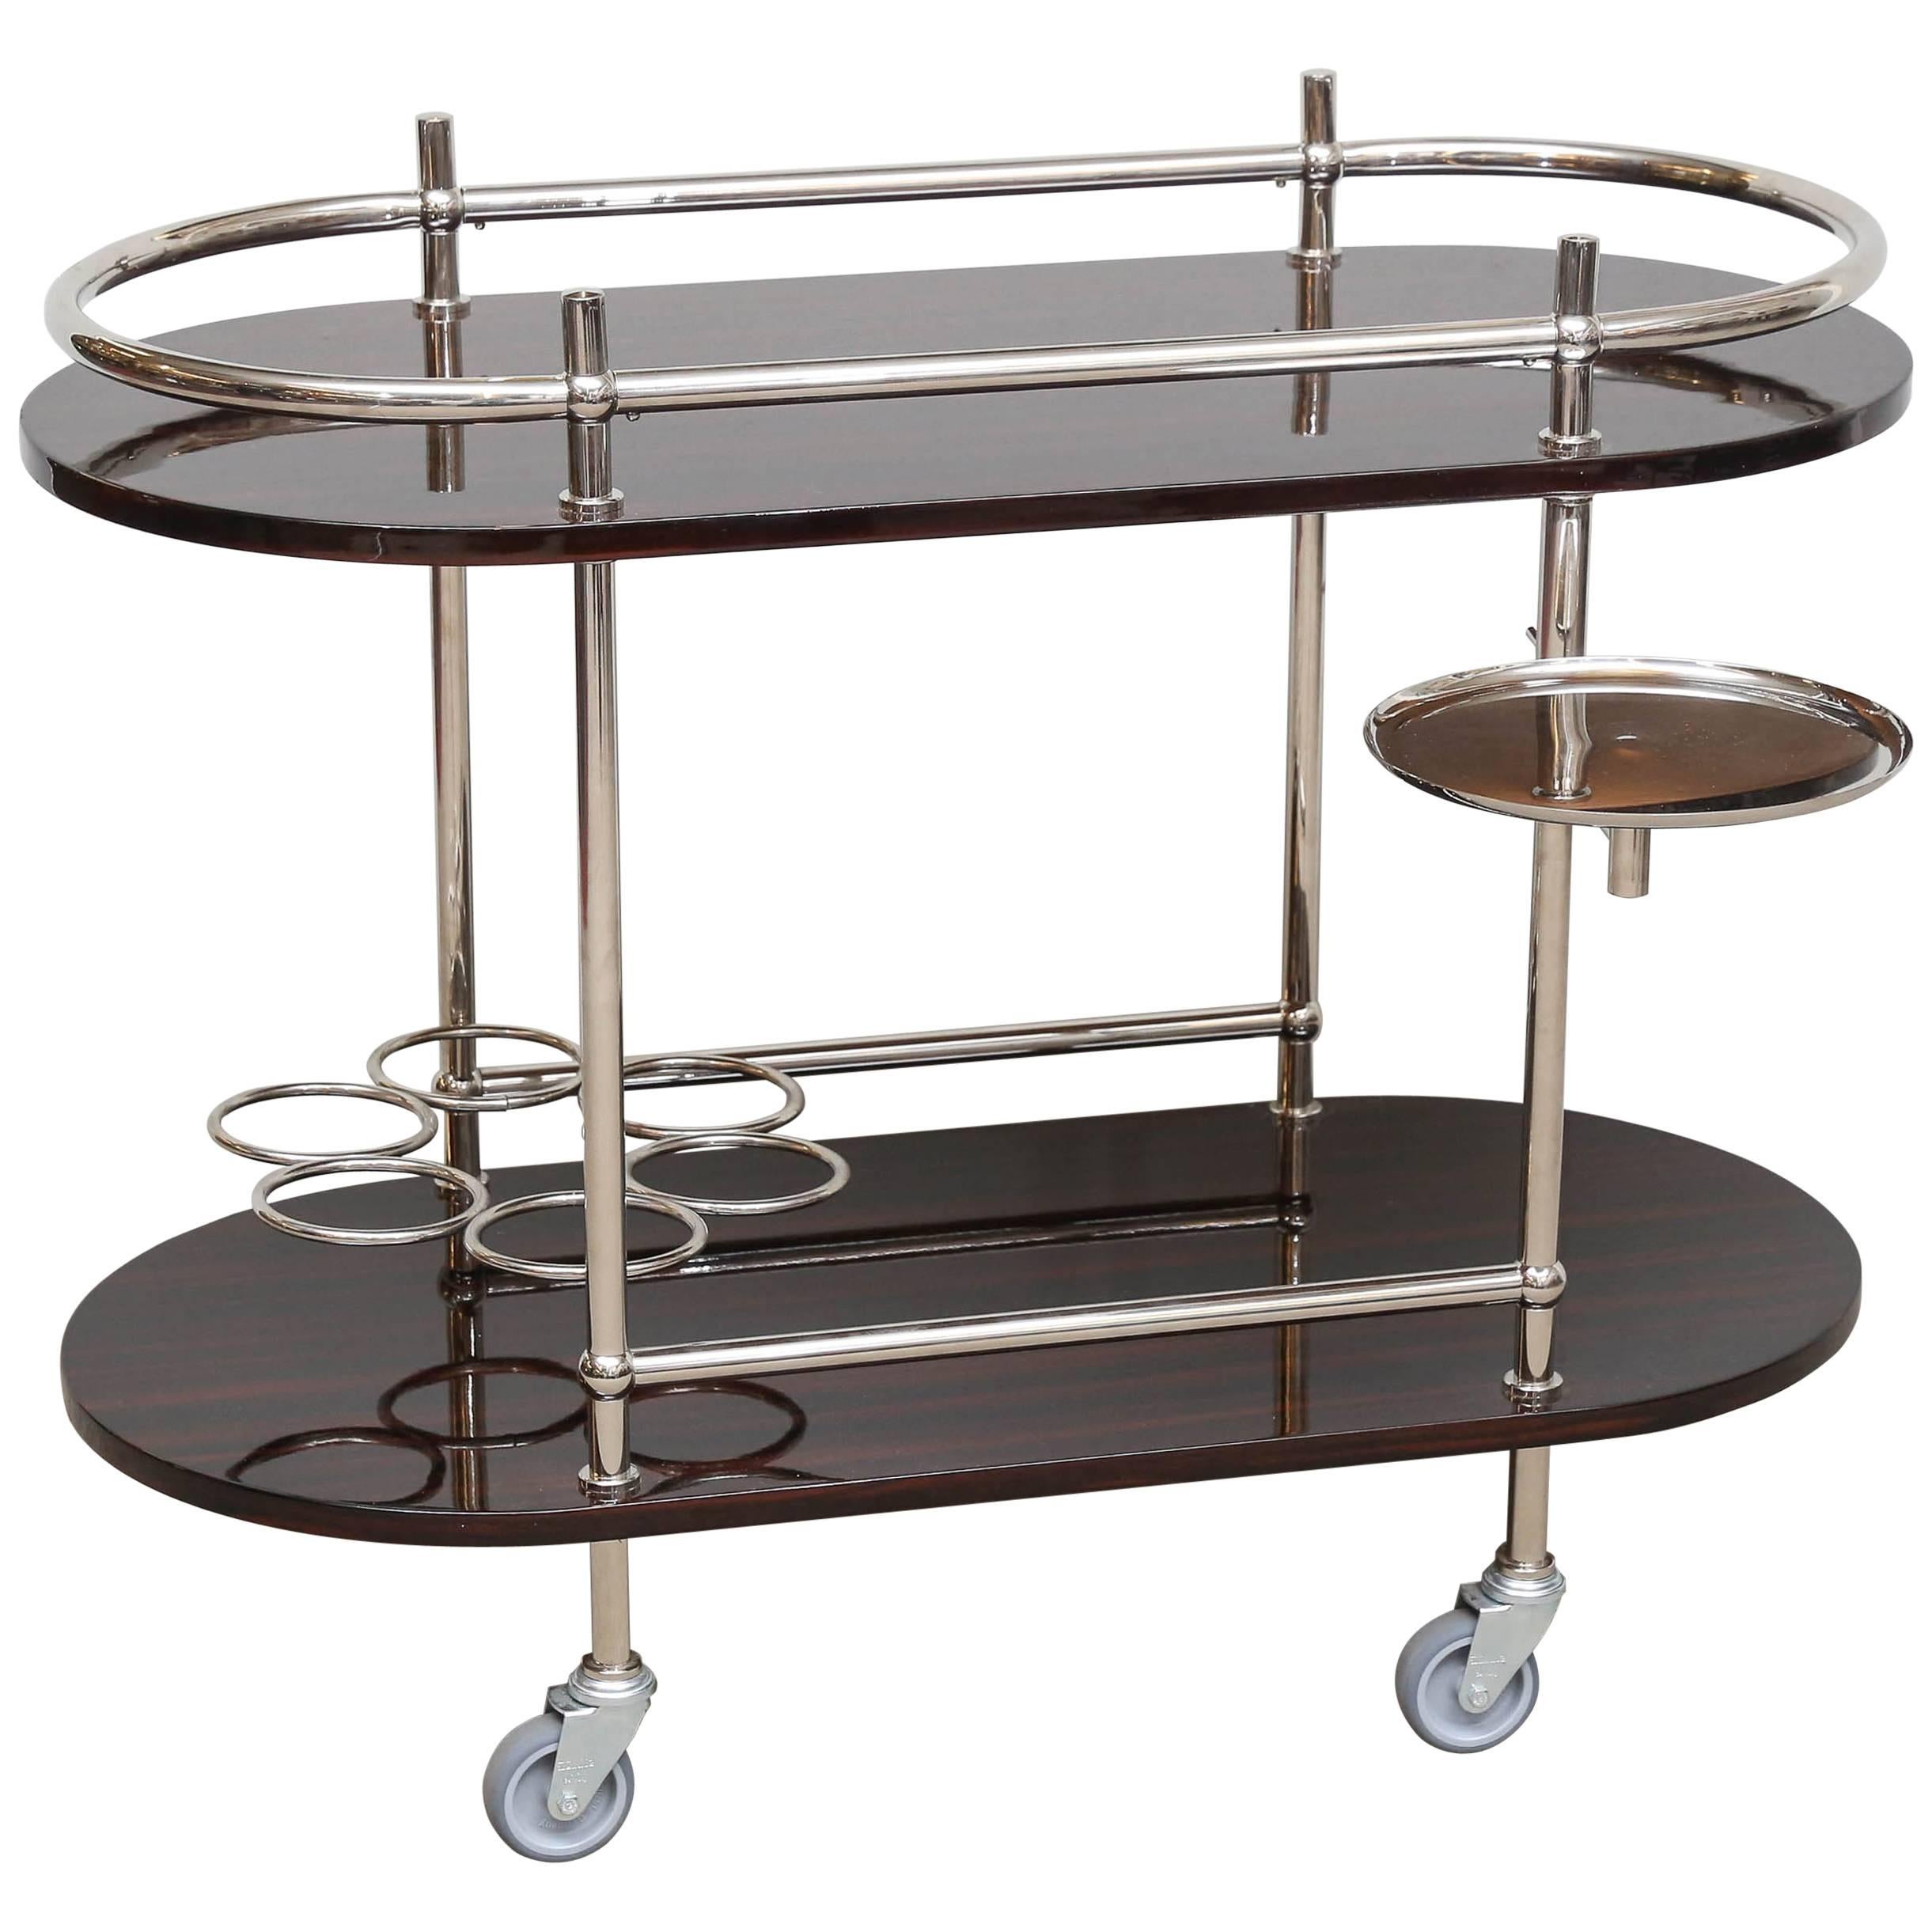 Oval veneer wood top tray rests above a smaller oval shaped base tray. The cart is held together with chrome tubing supports, which also utilized as rails and shaped into glass or bottle holders. There is a build in ice bucket holder that folds in